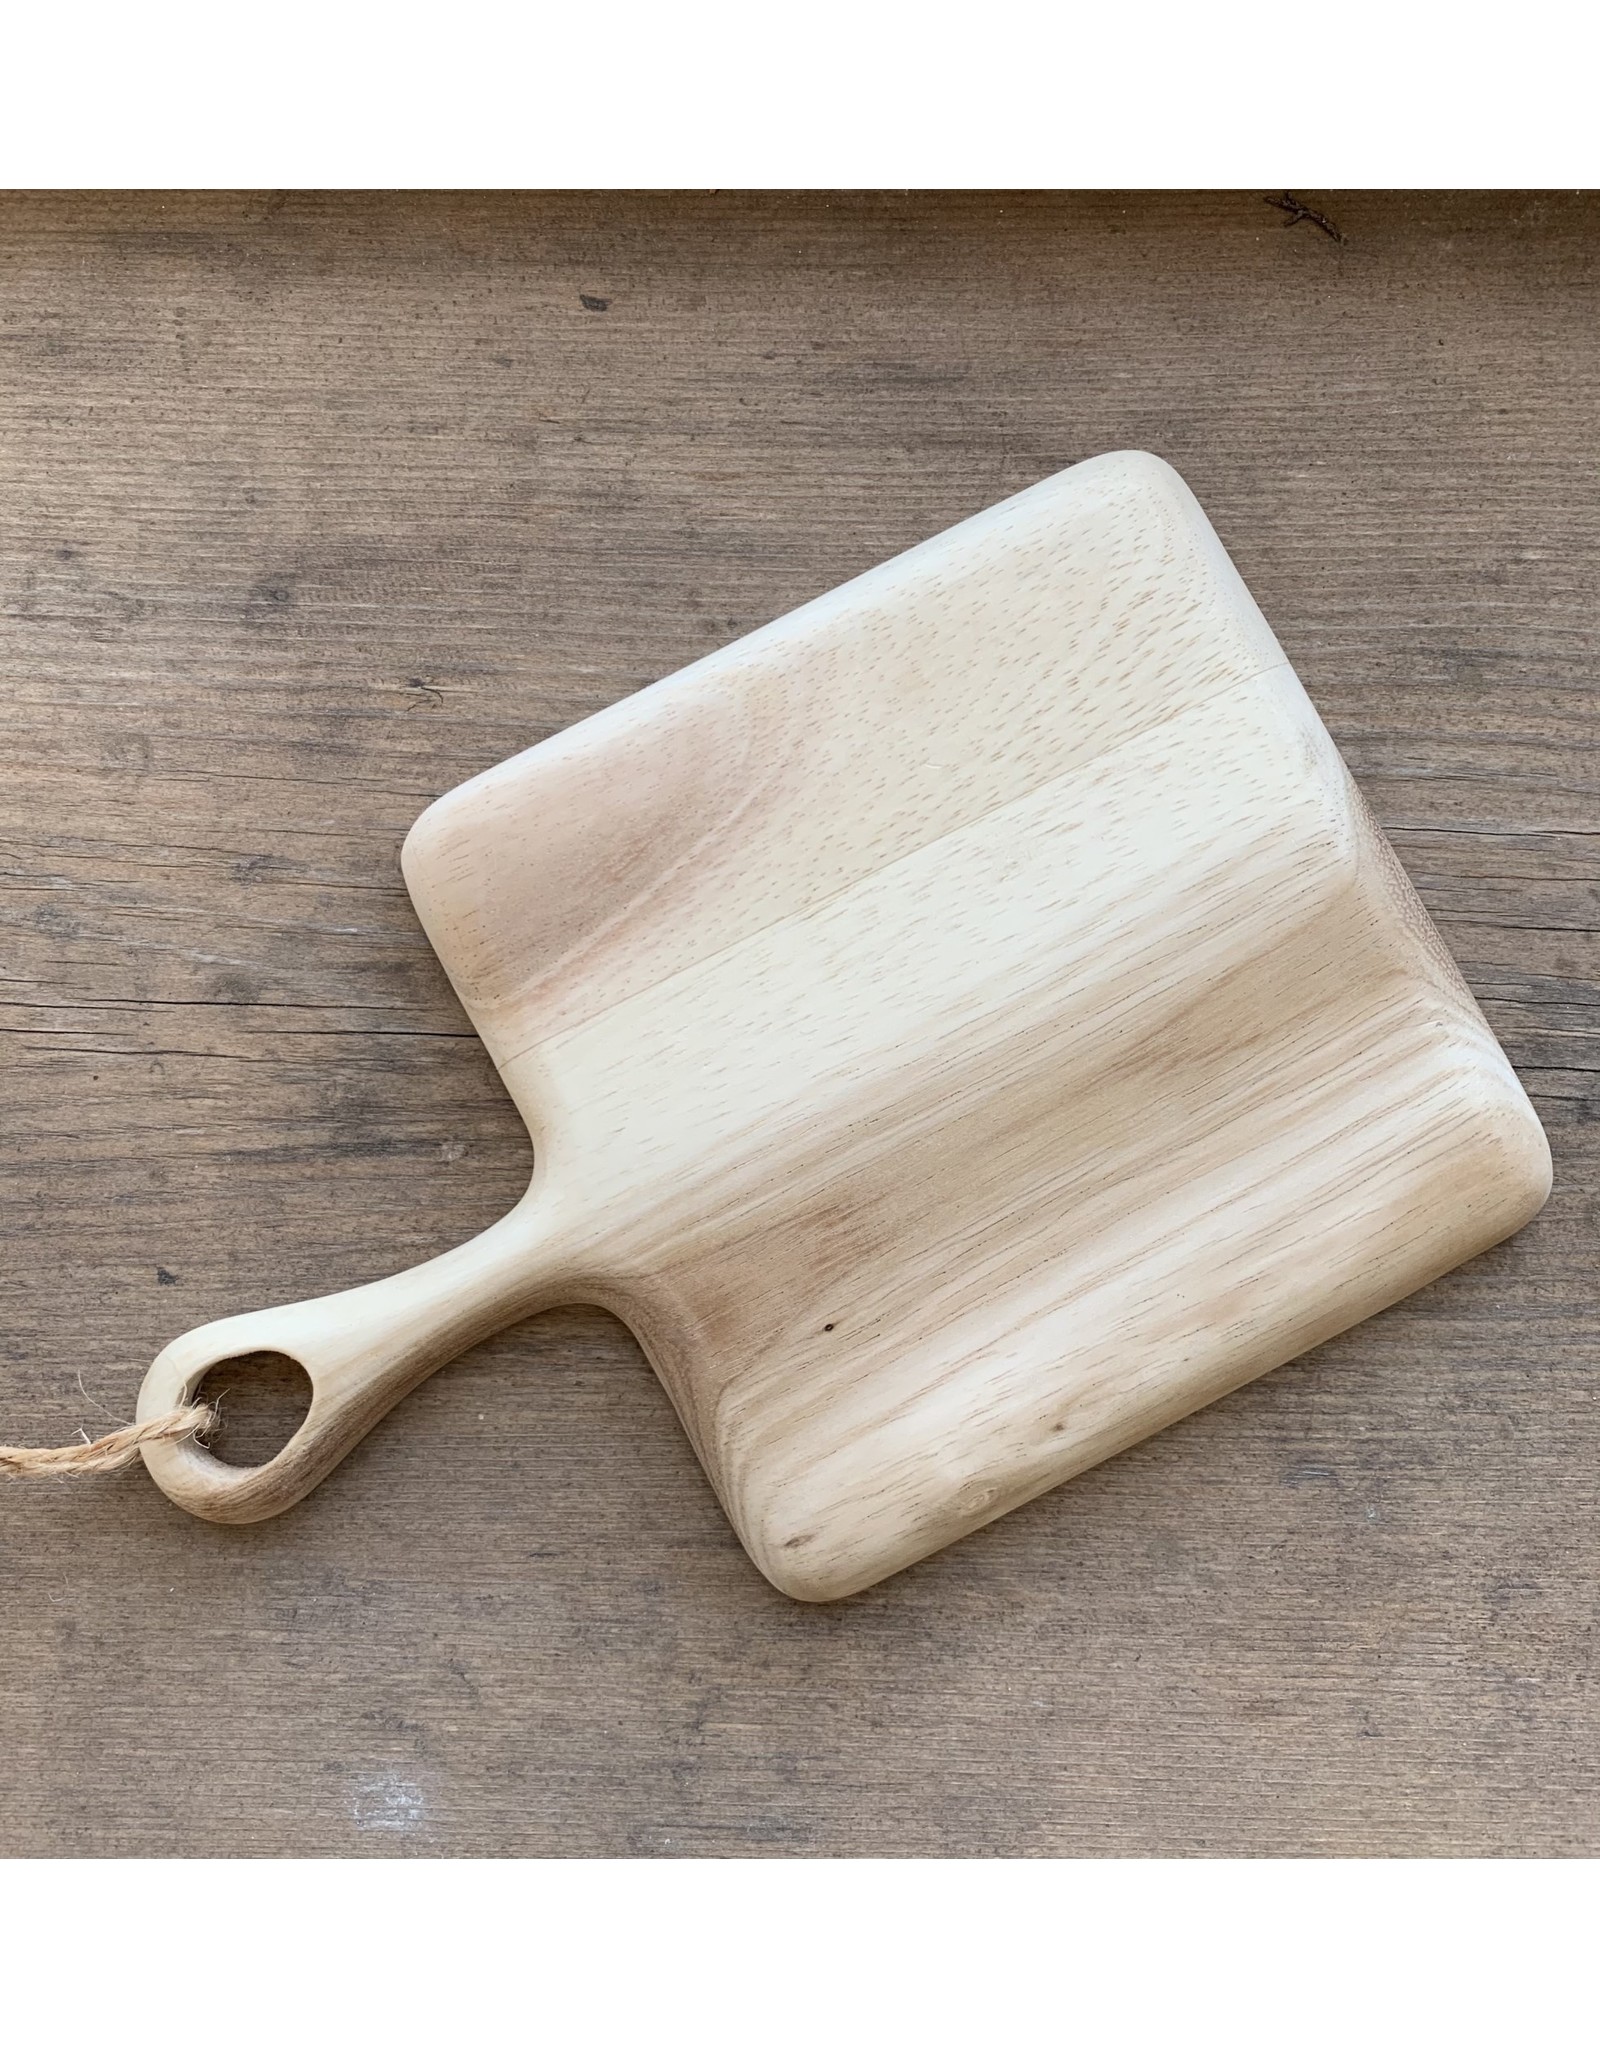 Acacia Square Board with Handle Mini. 5x5 with 2" handle